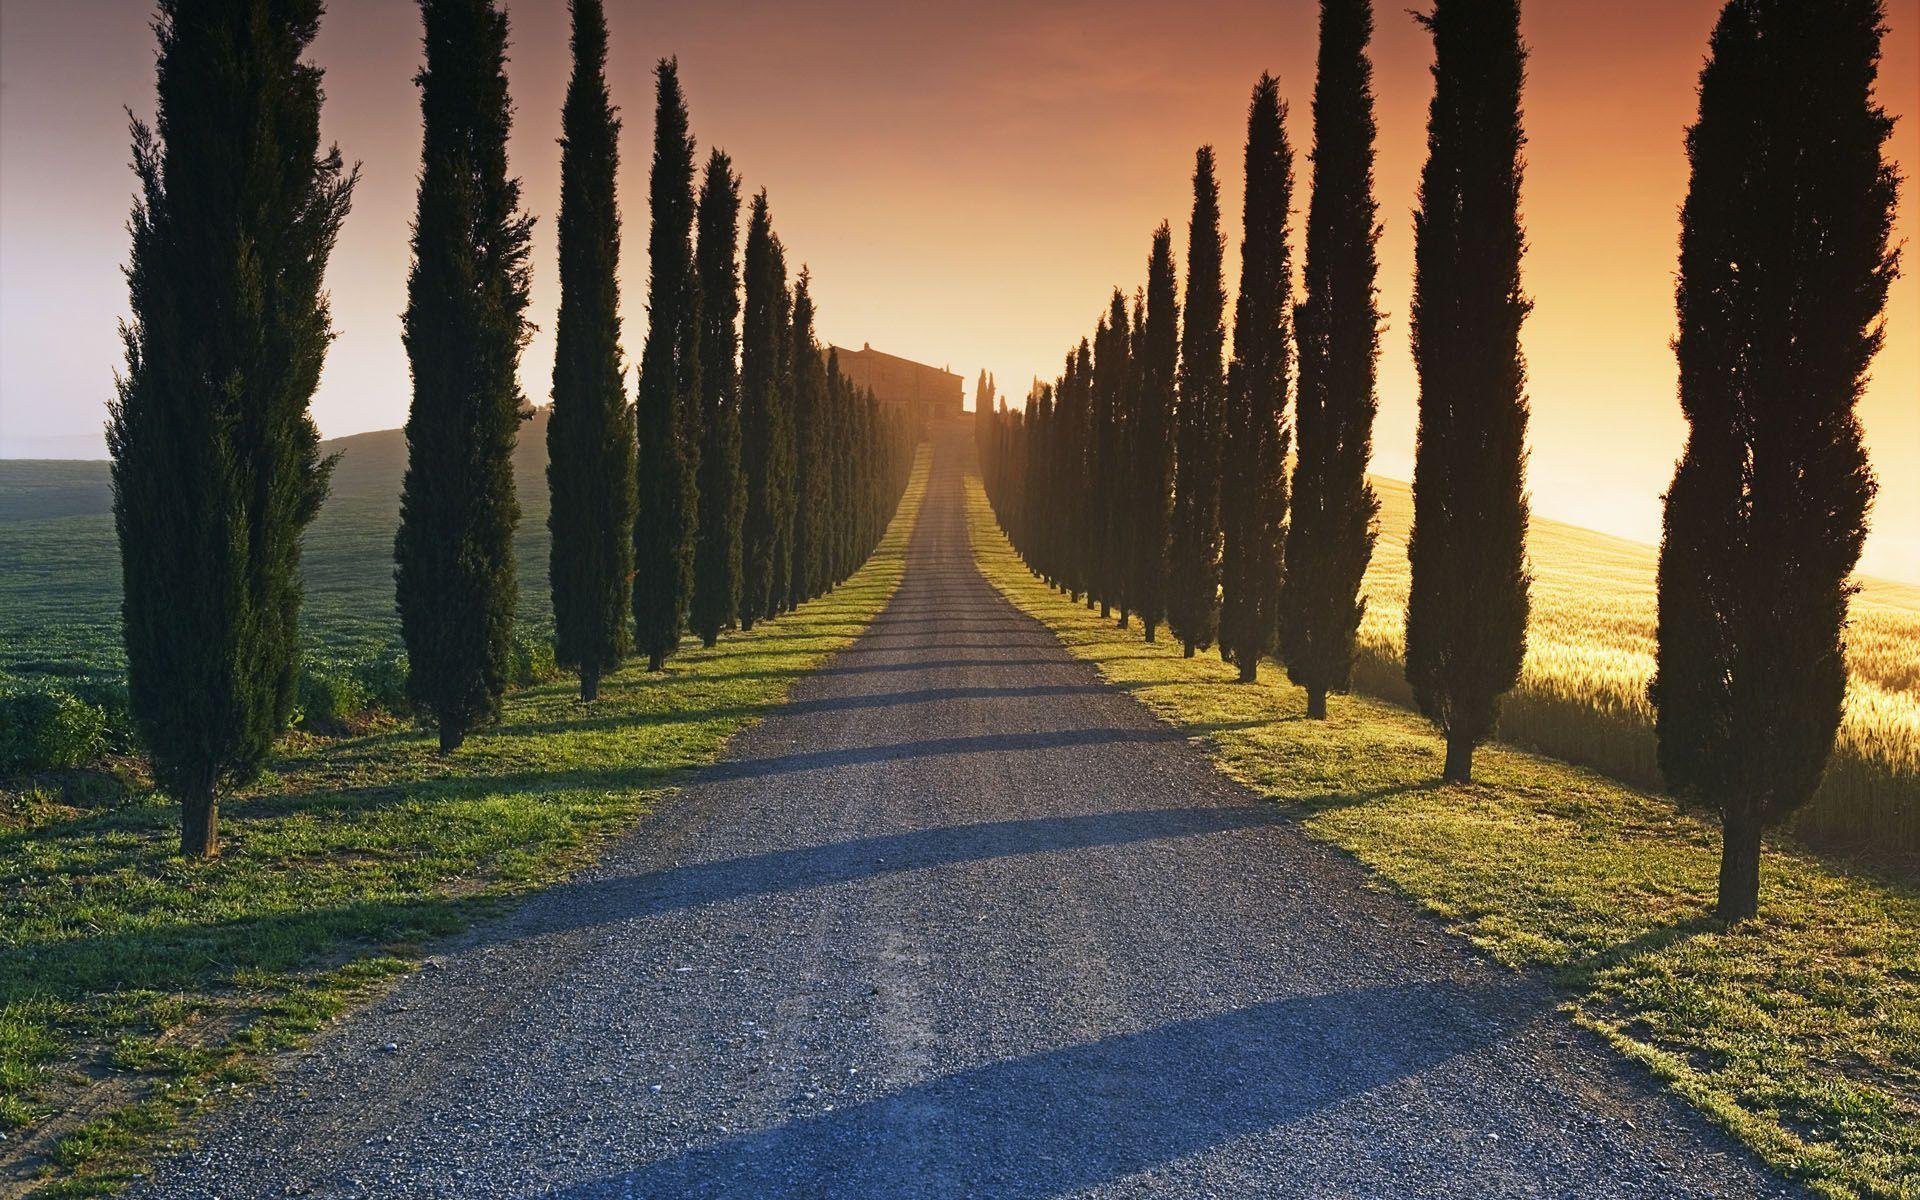 The road to the Italian estate wallpaper and image